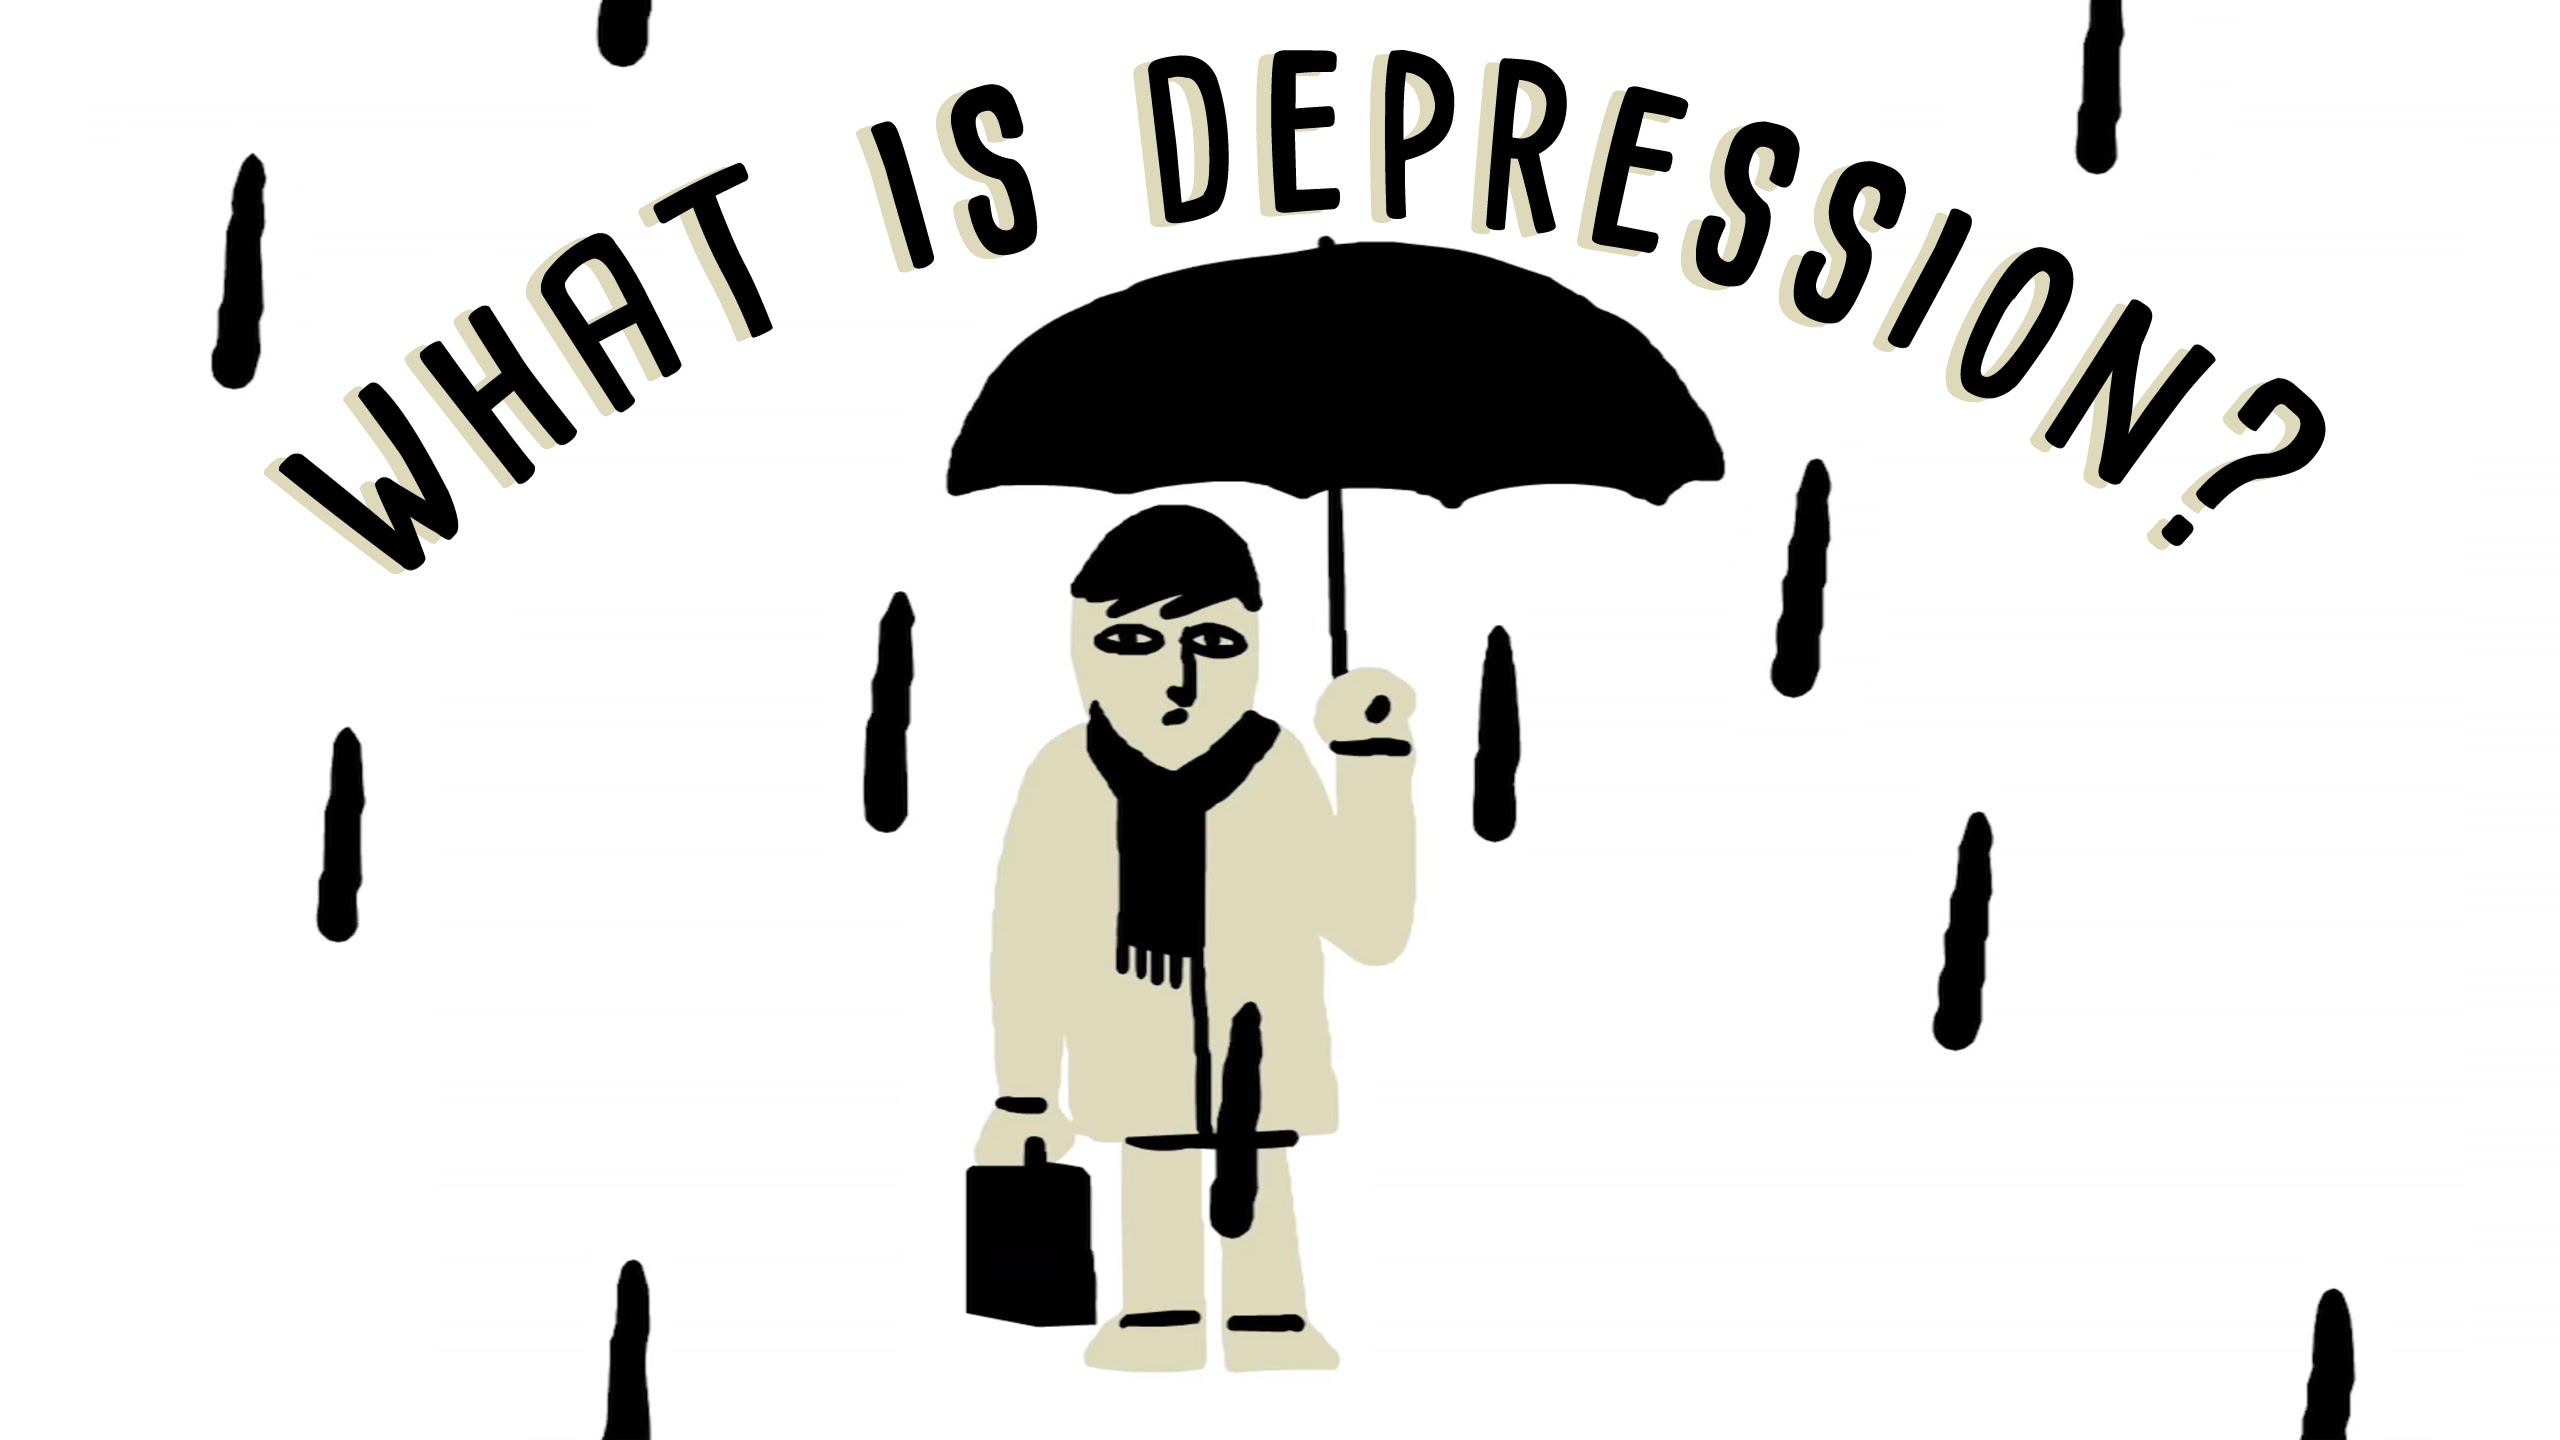 Questions About Depression